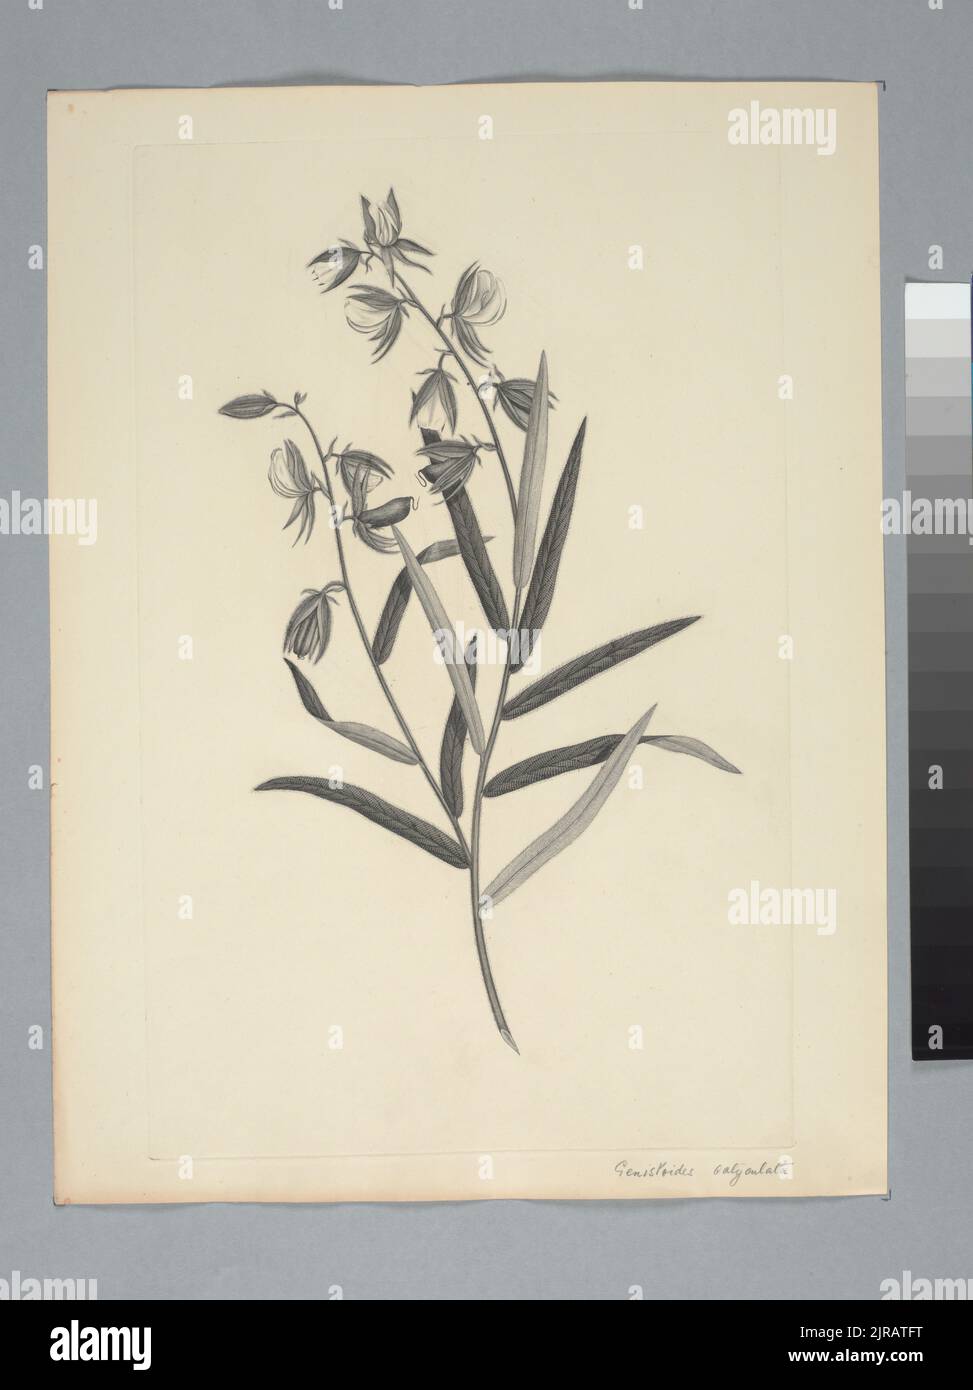 Crotalaria calycina Schrank, by Sydney Parkinson. Gift of the British Museum, 1895. Stock Photo